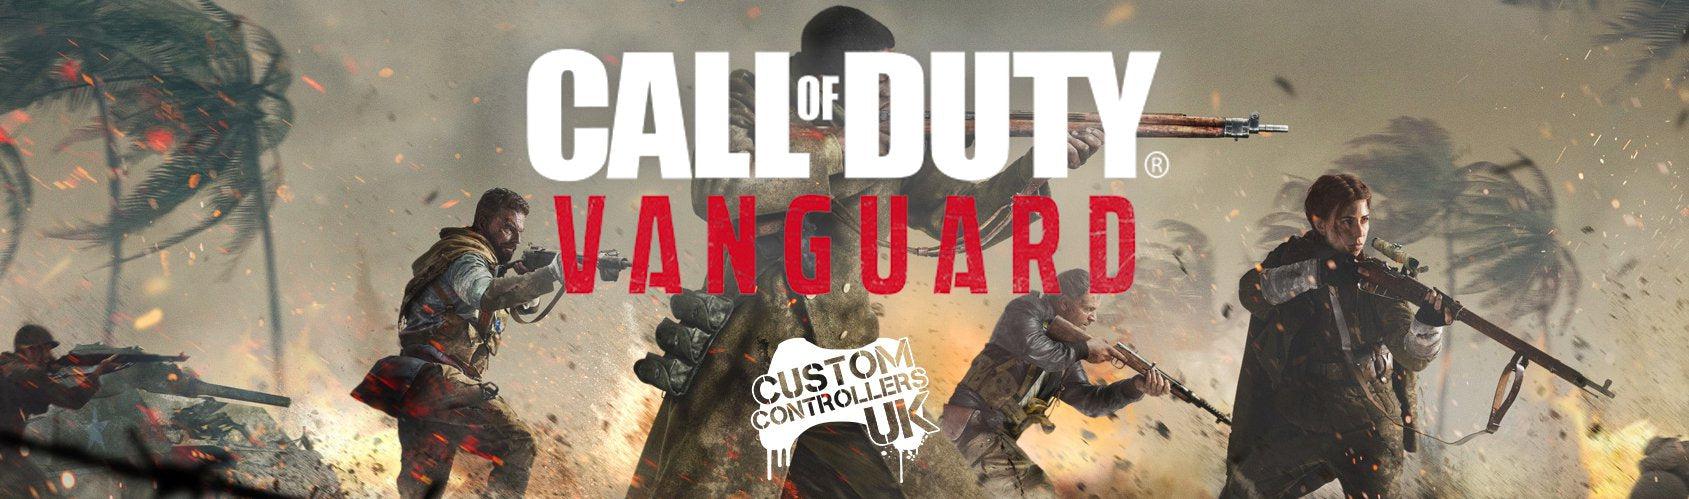 What We Know About Call of Duty Vanguard-Custom Controllers UK